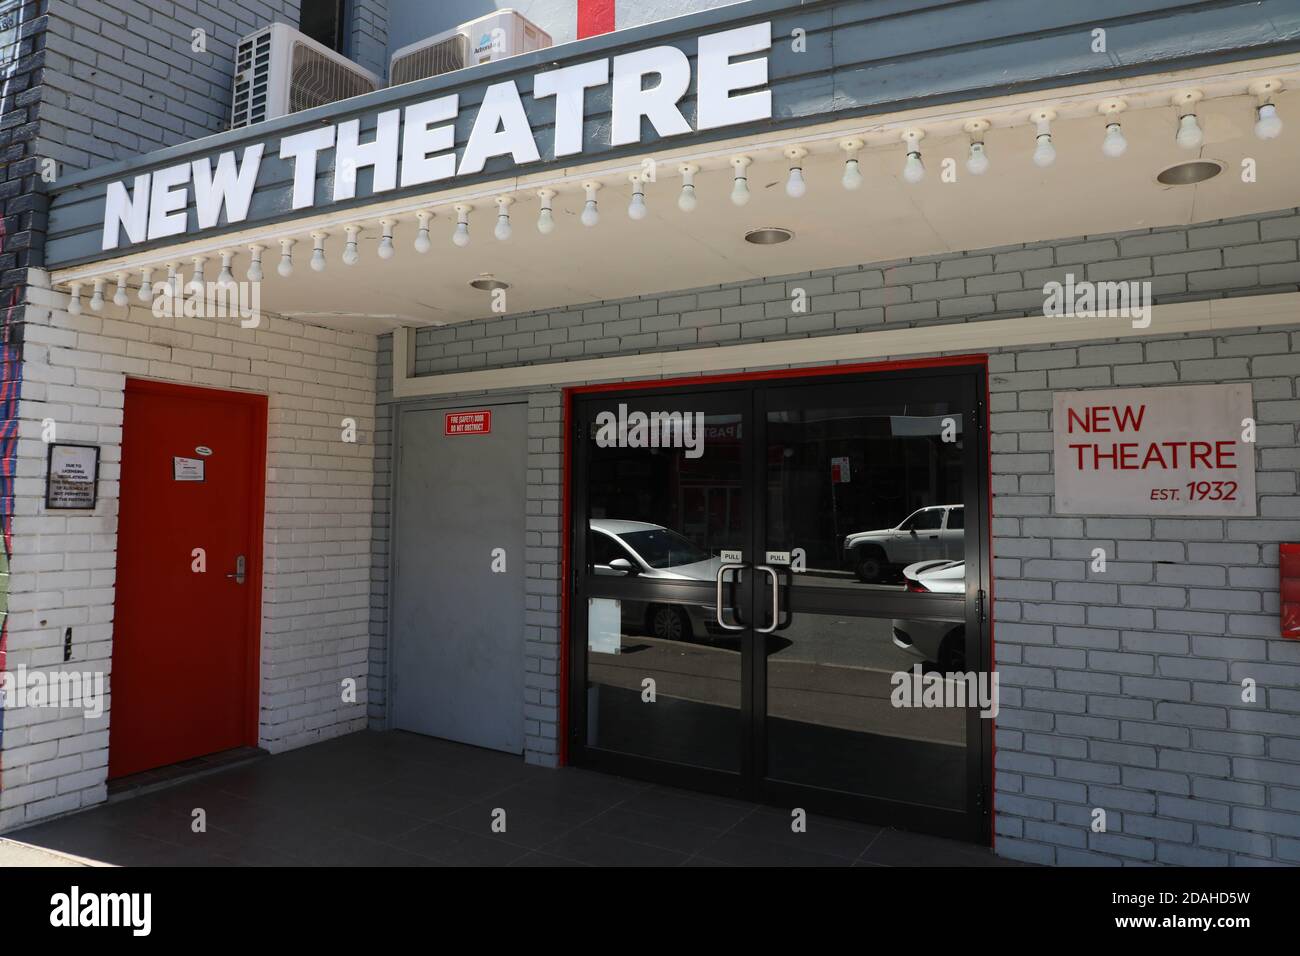 New Theatre, die älteste Theatercompany in kontinuierlicher Produktion in New South Wales in 542 King St, Newtown NSW 2042 Stockfoto